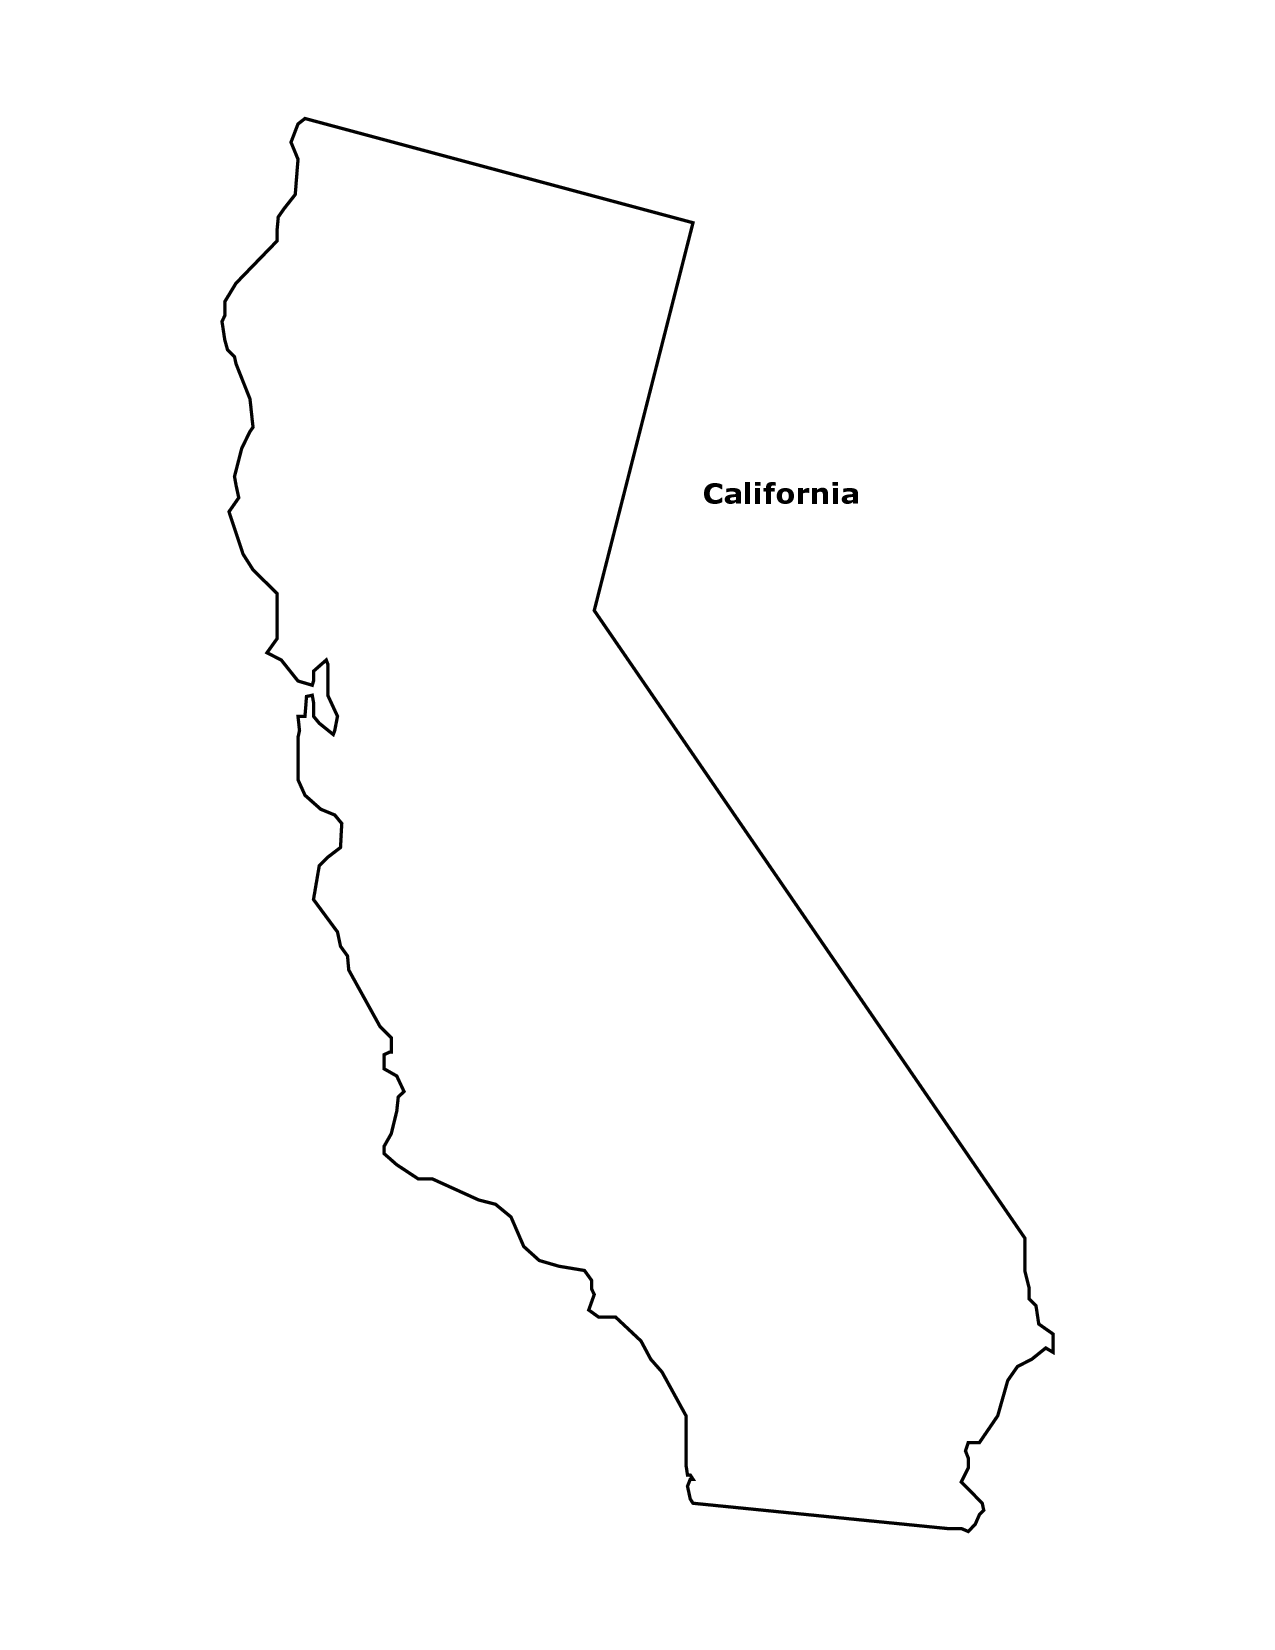 California Map Outline Images & Pictures - Becuo